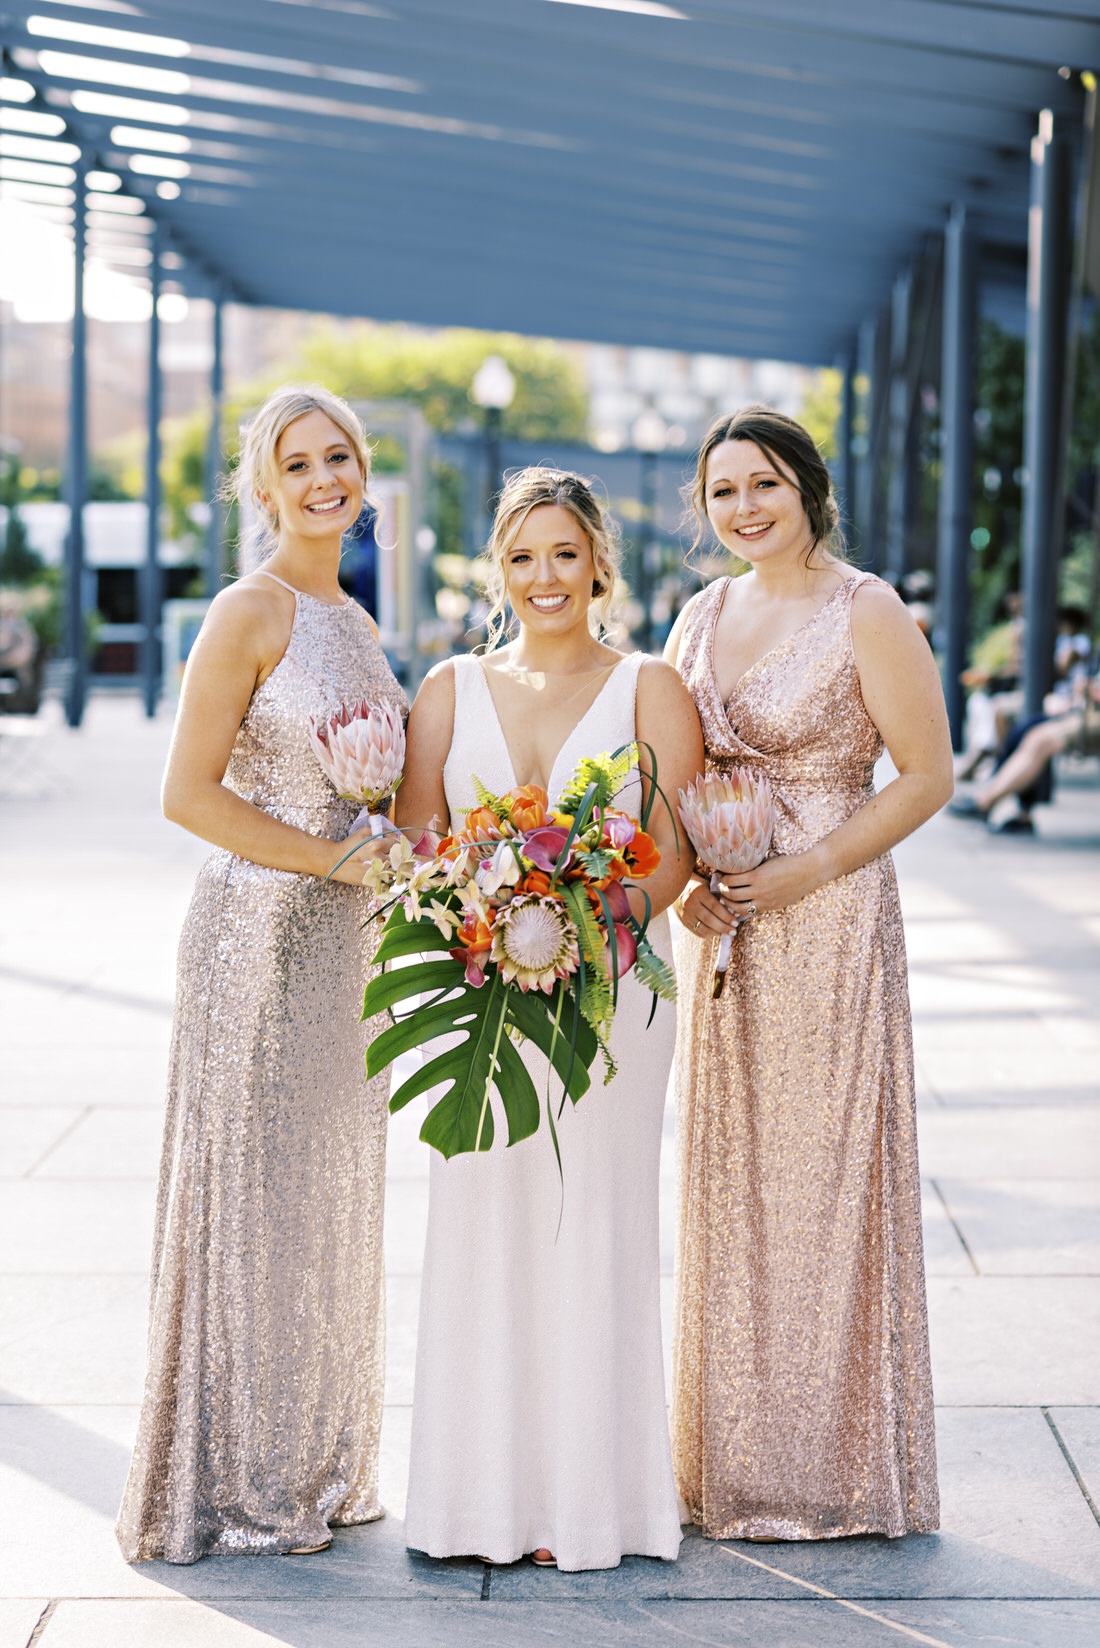 Bride and bridesmaids pose for photo at the Rose Kennedy Greenway